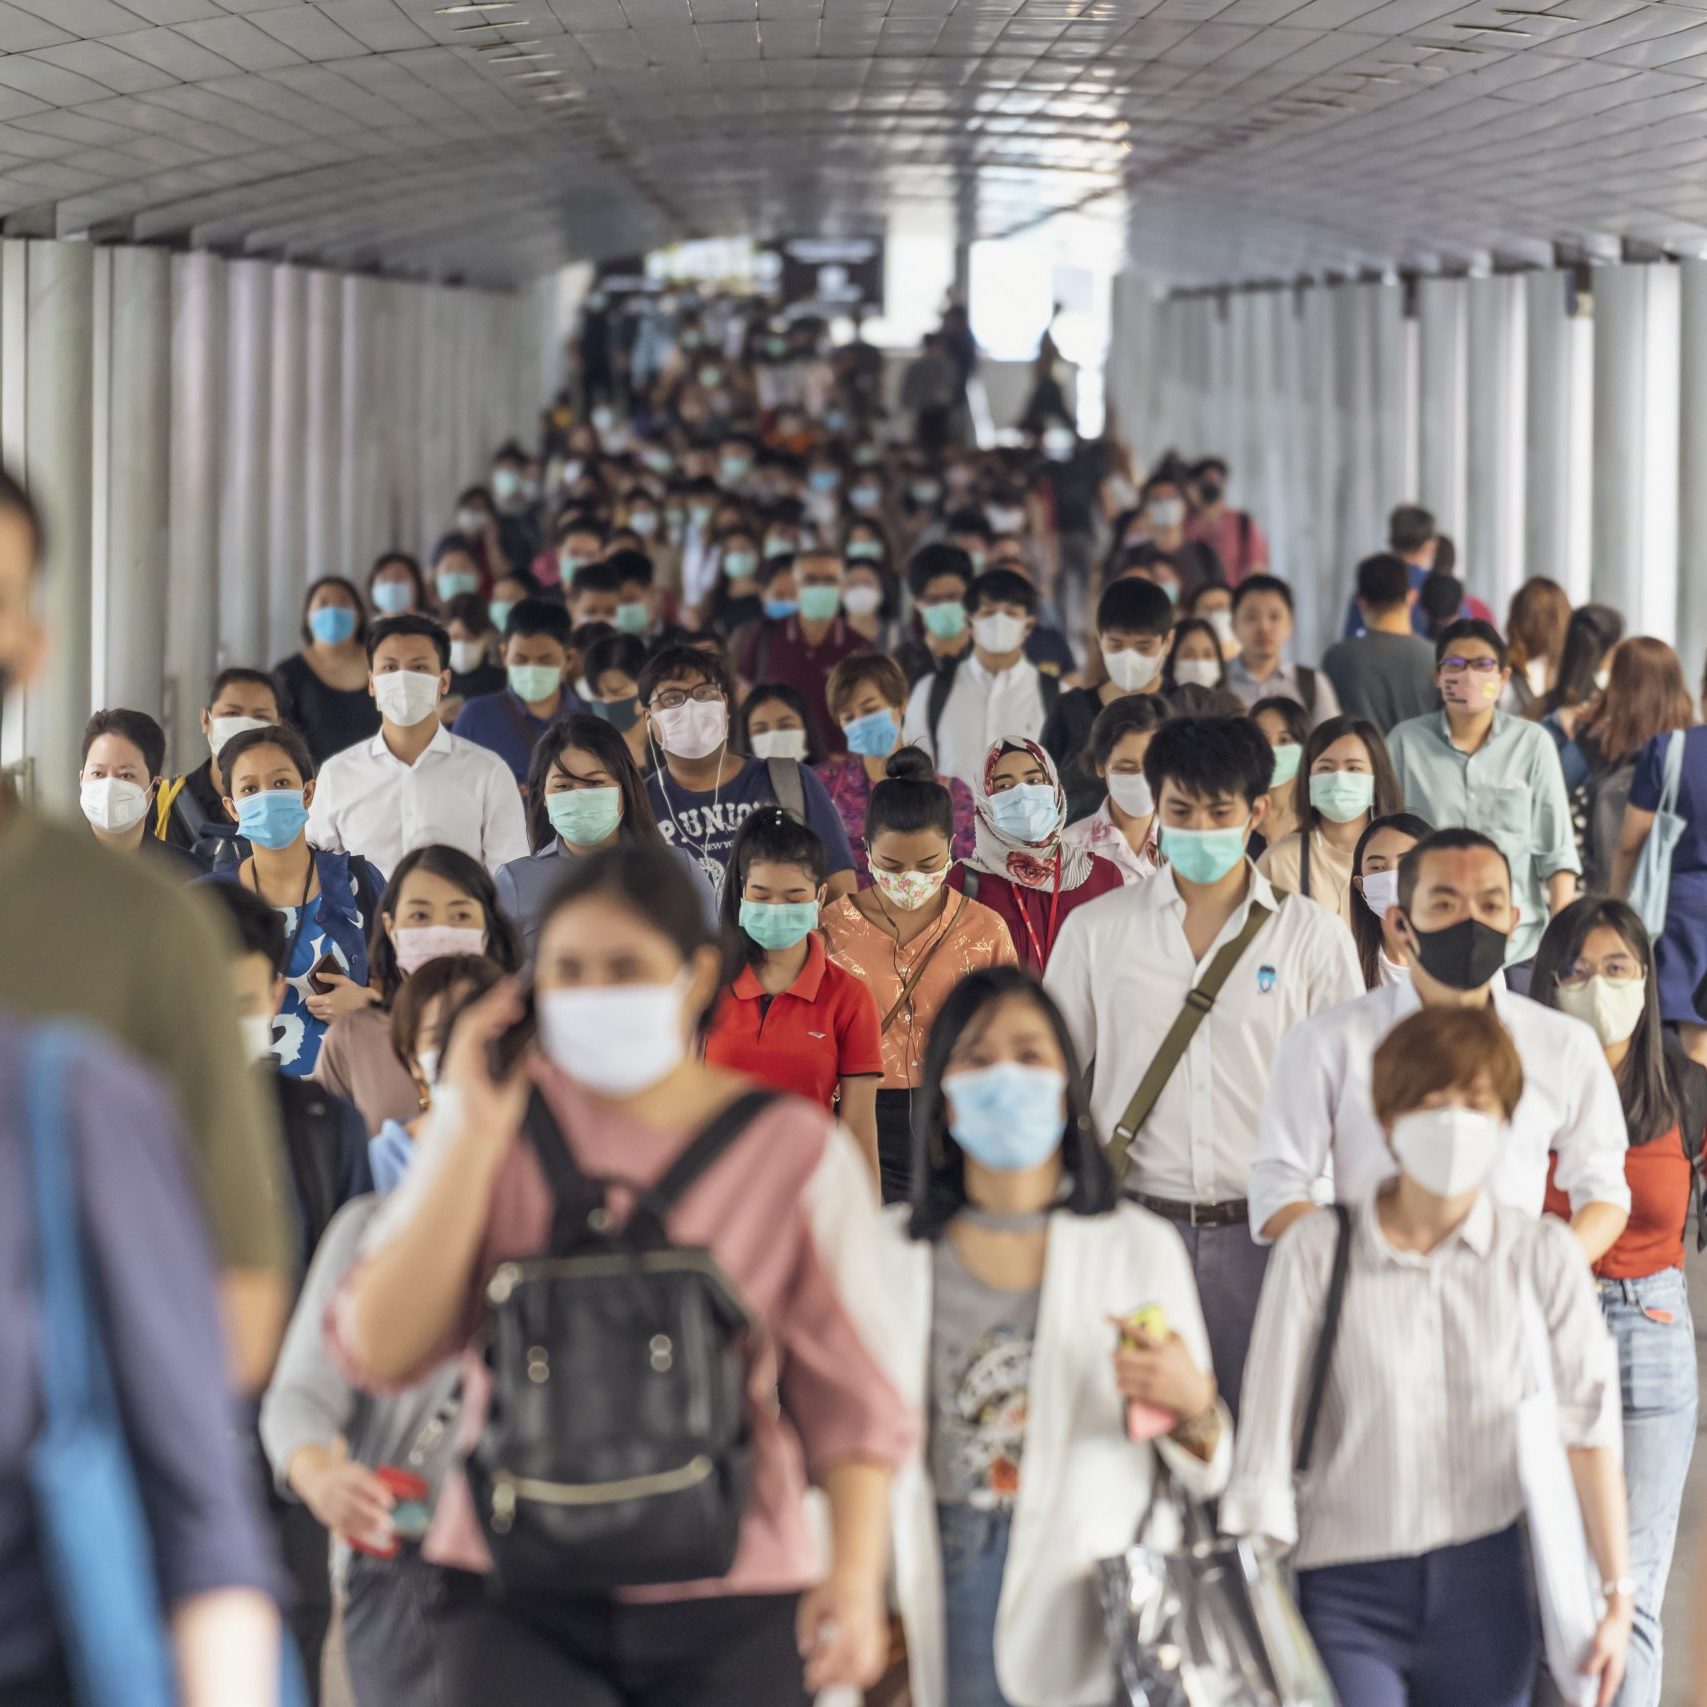 Bangkok, Thailand - Mar 2020 : Crowd of unrecognizable business people wearing surgical mask for prevent coronavirus Outbreak in rush hour working day on March 18, 2020 at Bangkok transportation